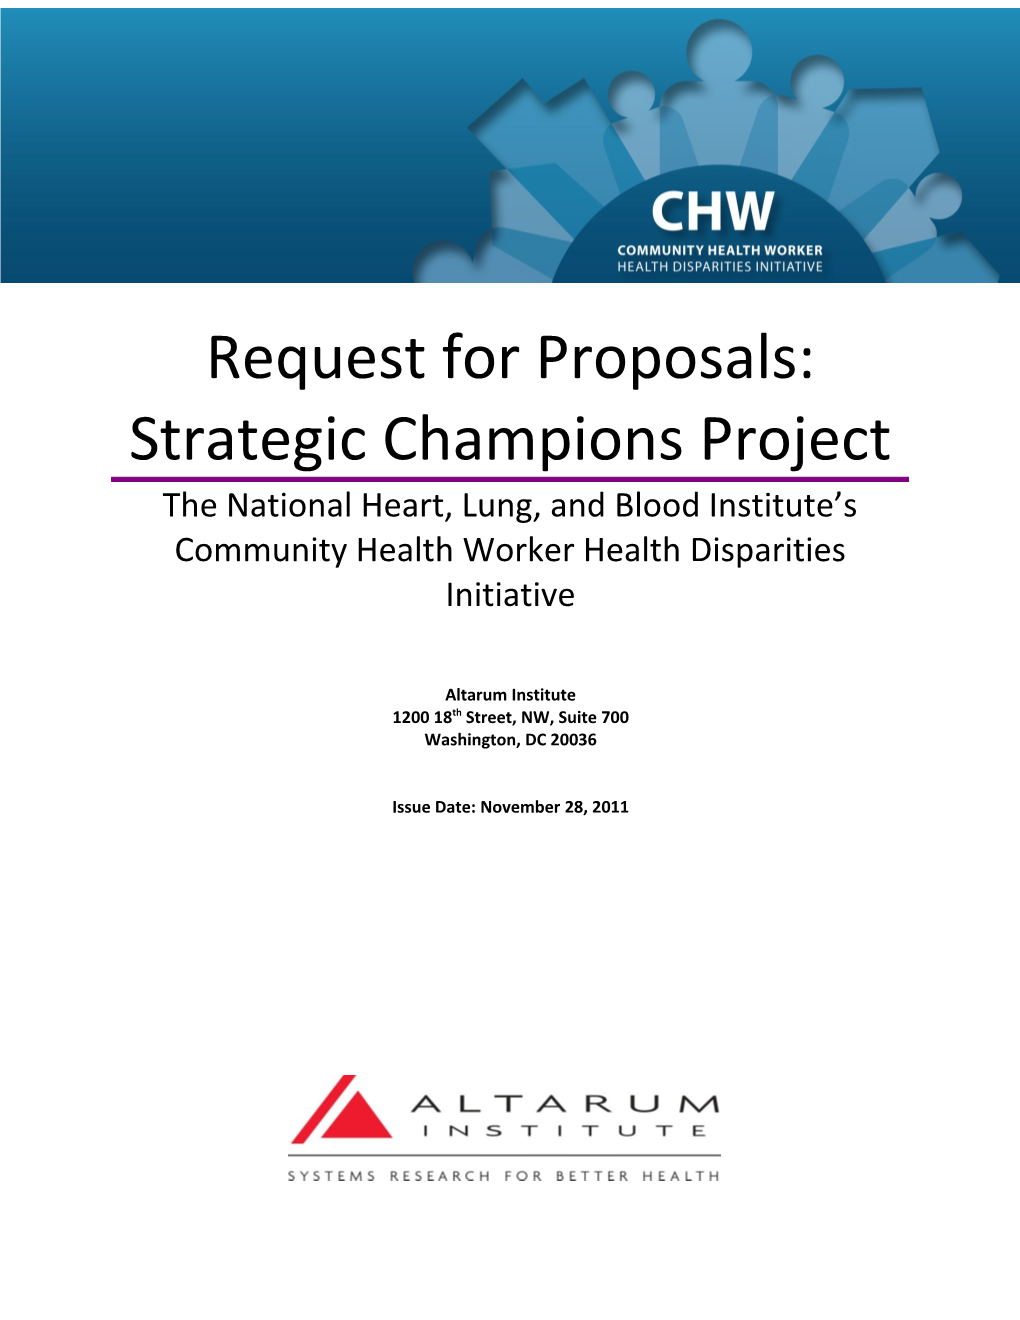 Request for Proposals: Strategic Champions Project